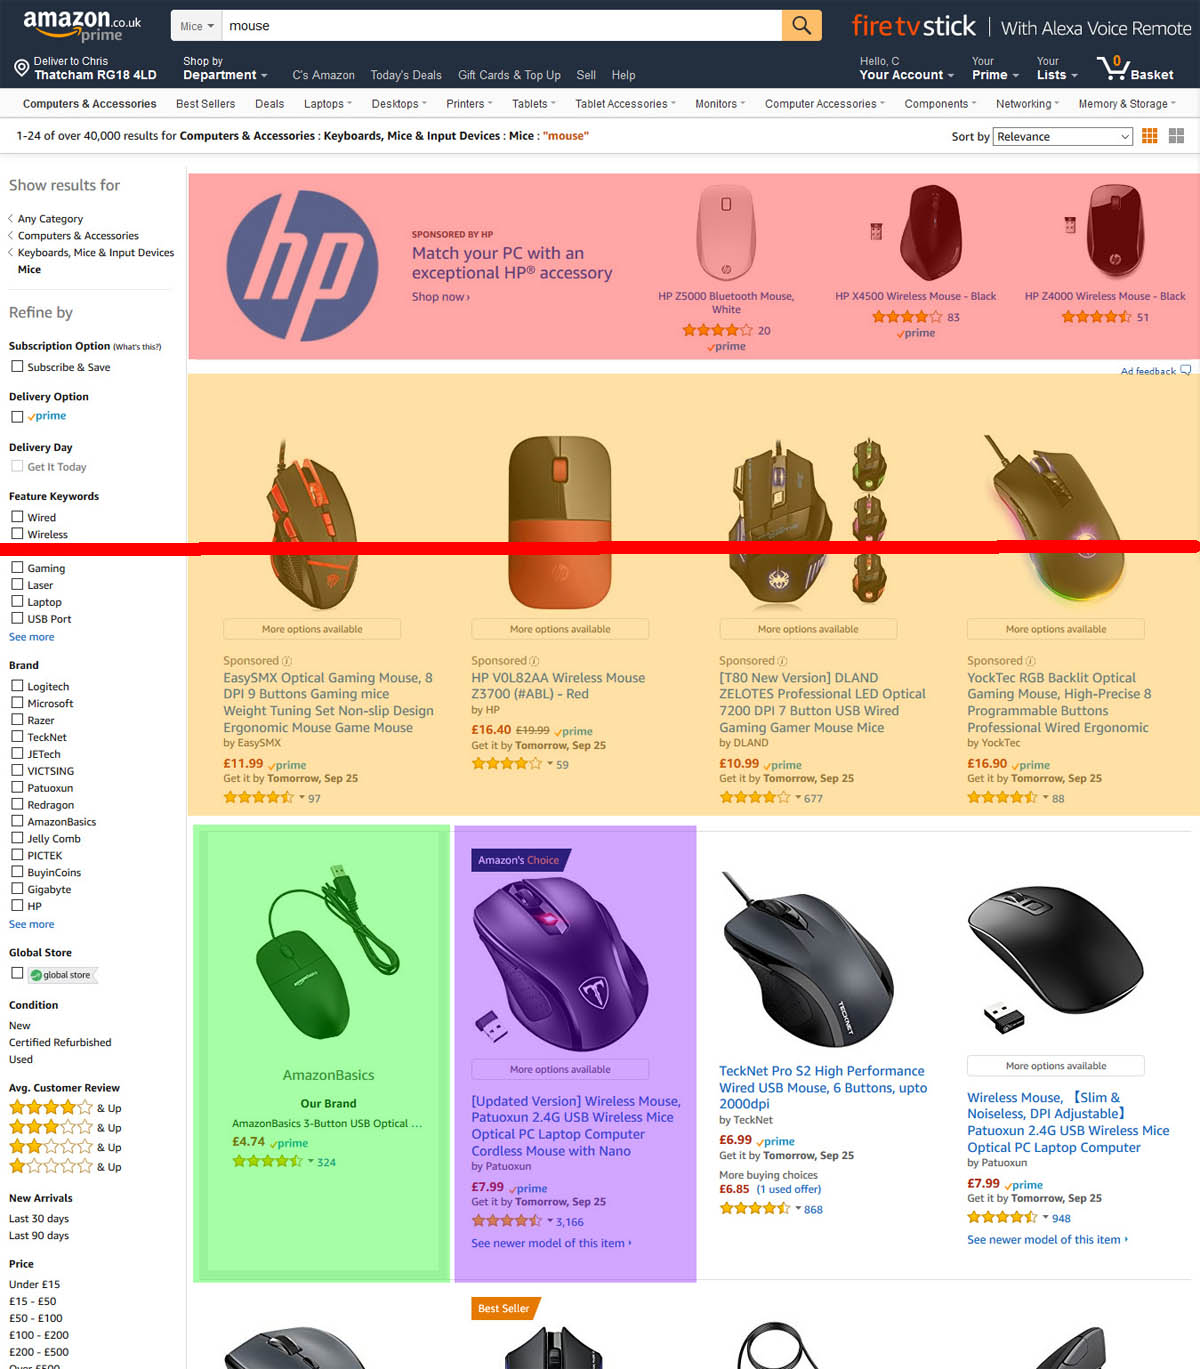 Amazon Advertising on search results page for mouse showing Amazon Own Brands